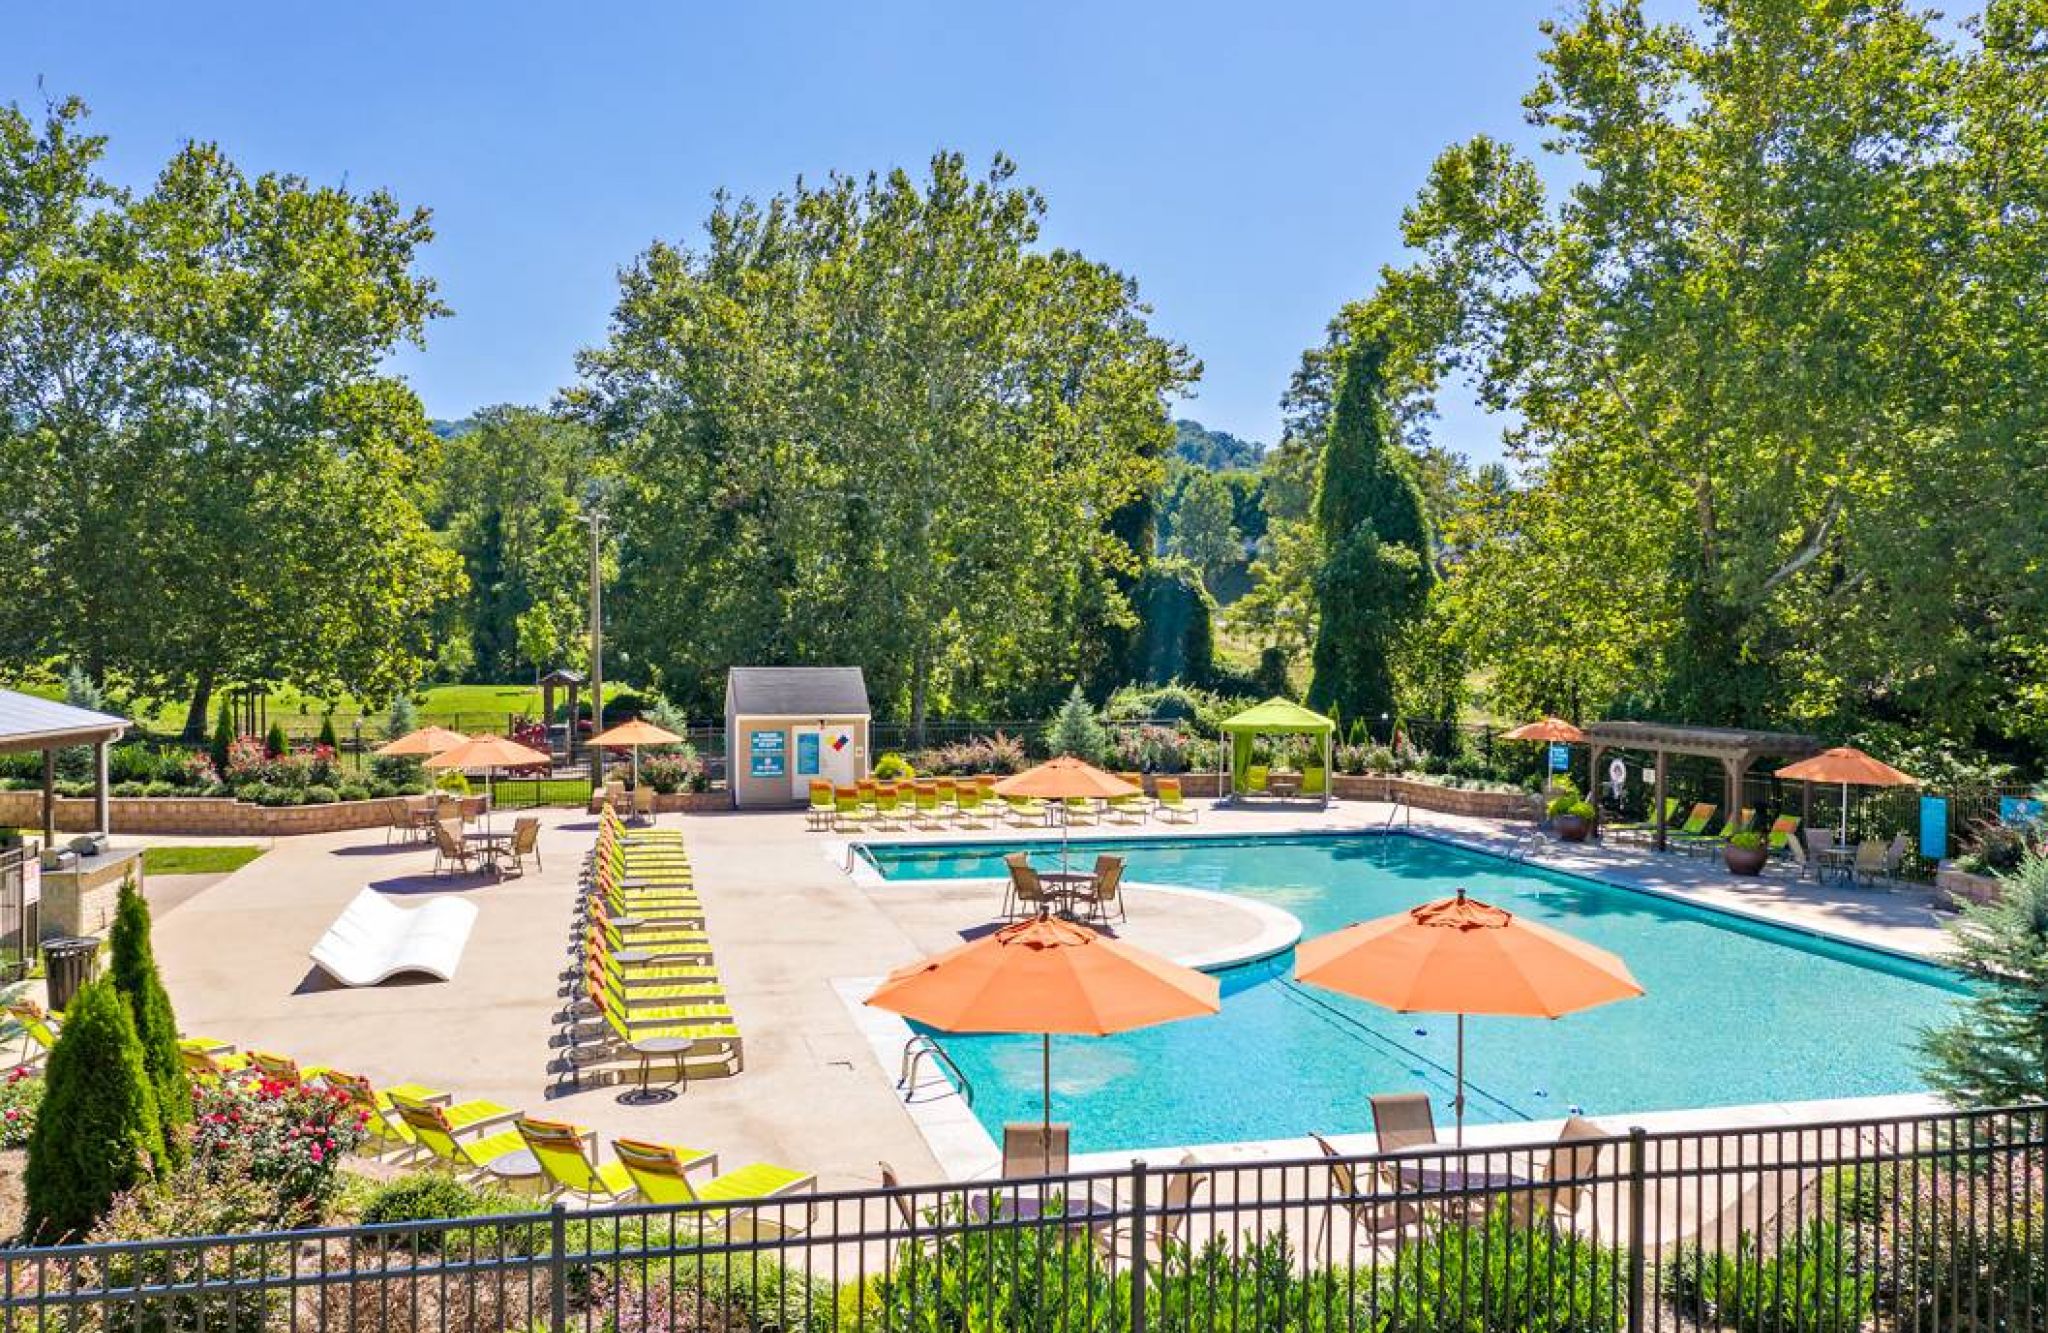 Pool at Hawthorne at Southside - a serene oasis for residents to relax and enjoy outdoor recreation.